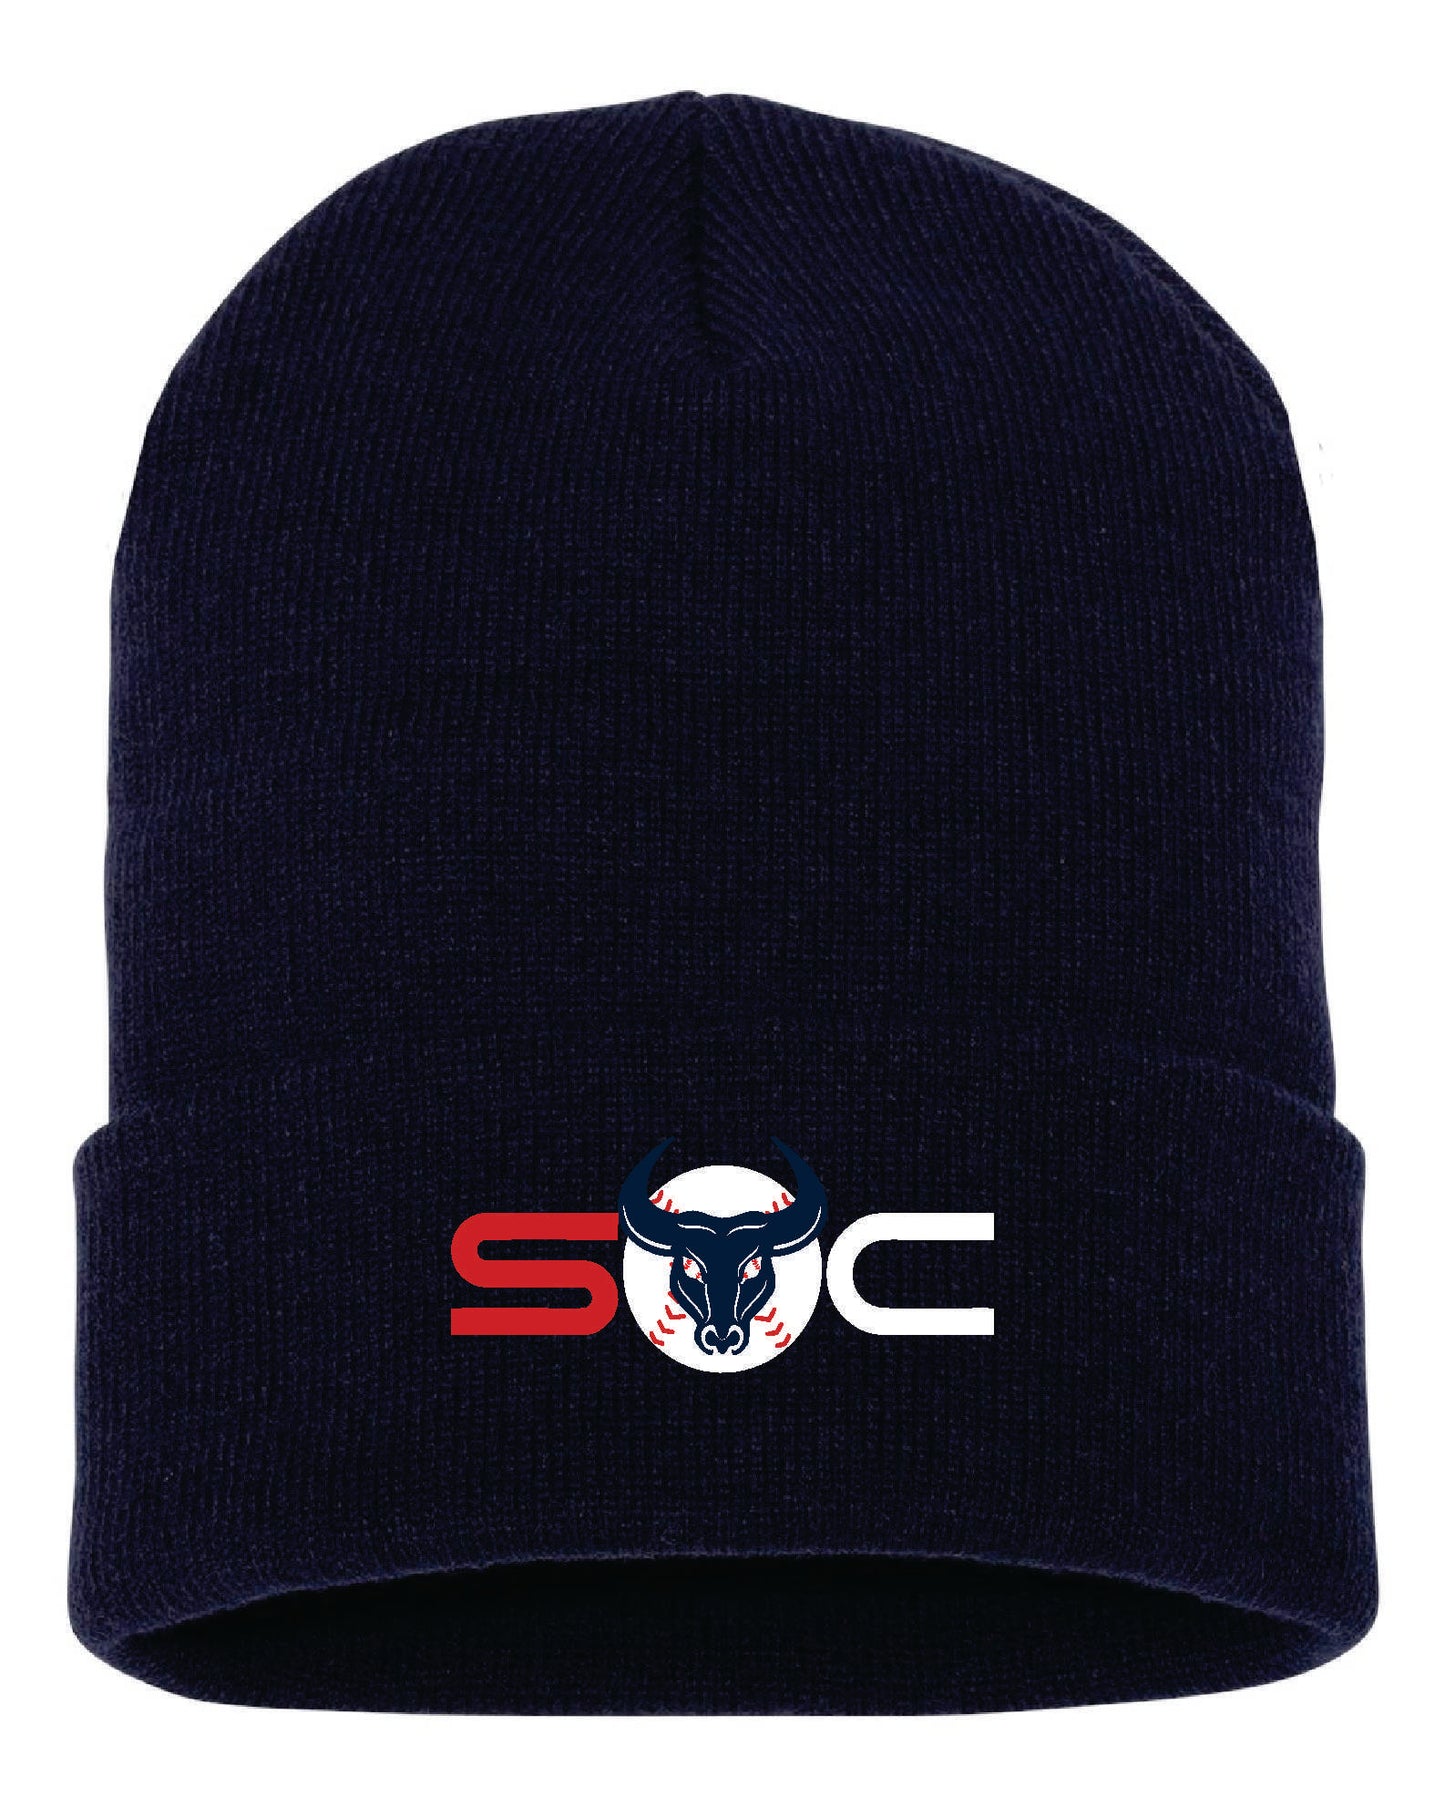 SC BEANIE WITH EMBROIDERED LOGO